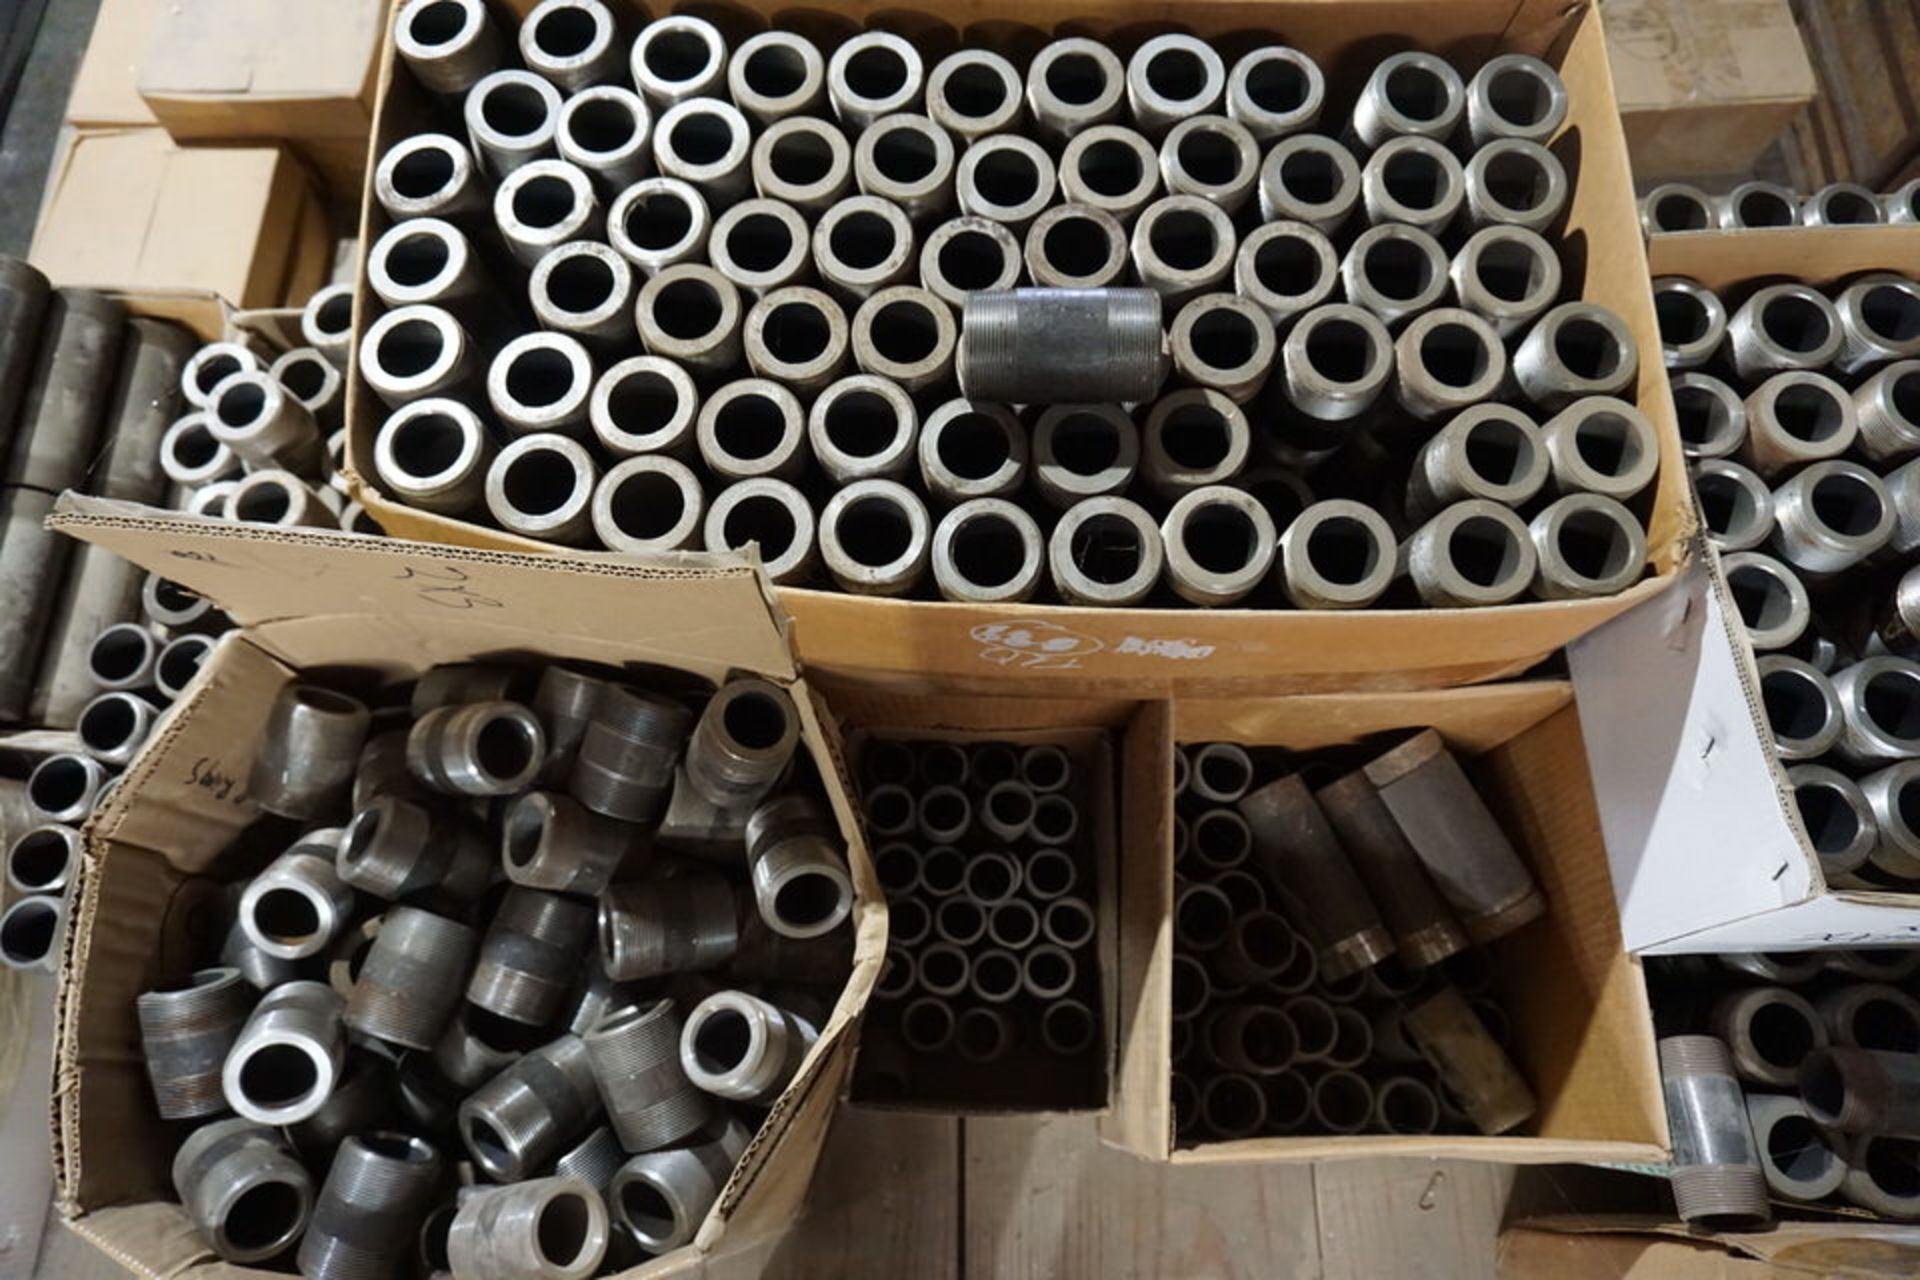 CONT OF TOP OF SHELVES: ASSORT SIZE PIPE NIPPLES, RANGE 1/8"X1" TO 2 1/2"X10" APPROX 3,000 PCS - Image 27 of 34